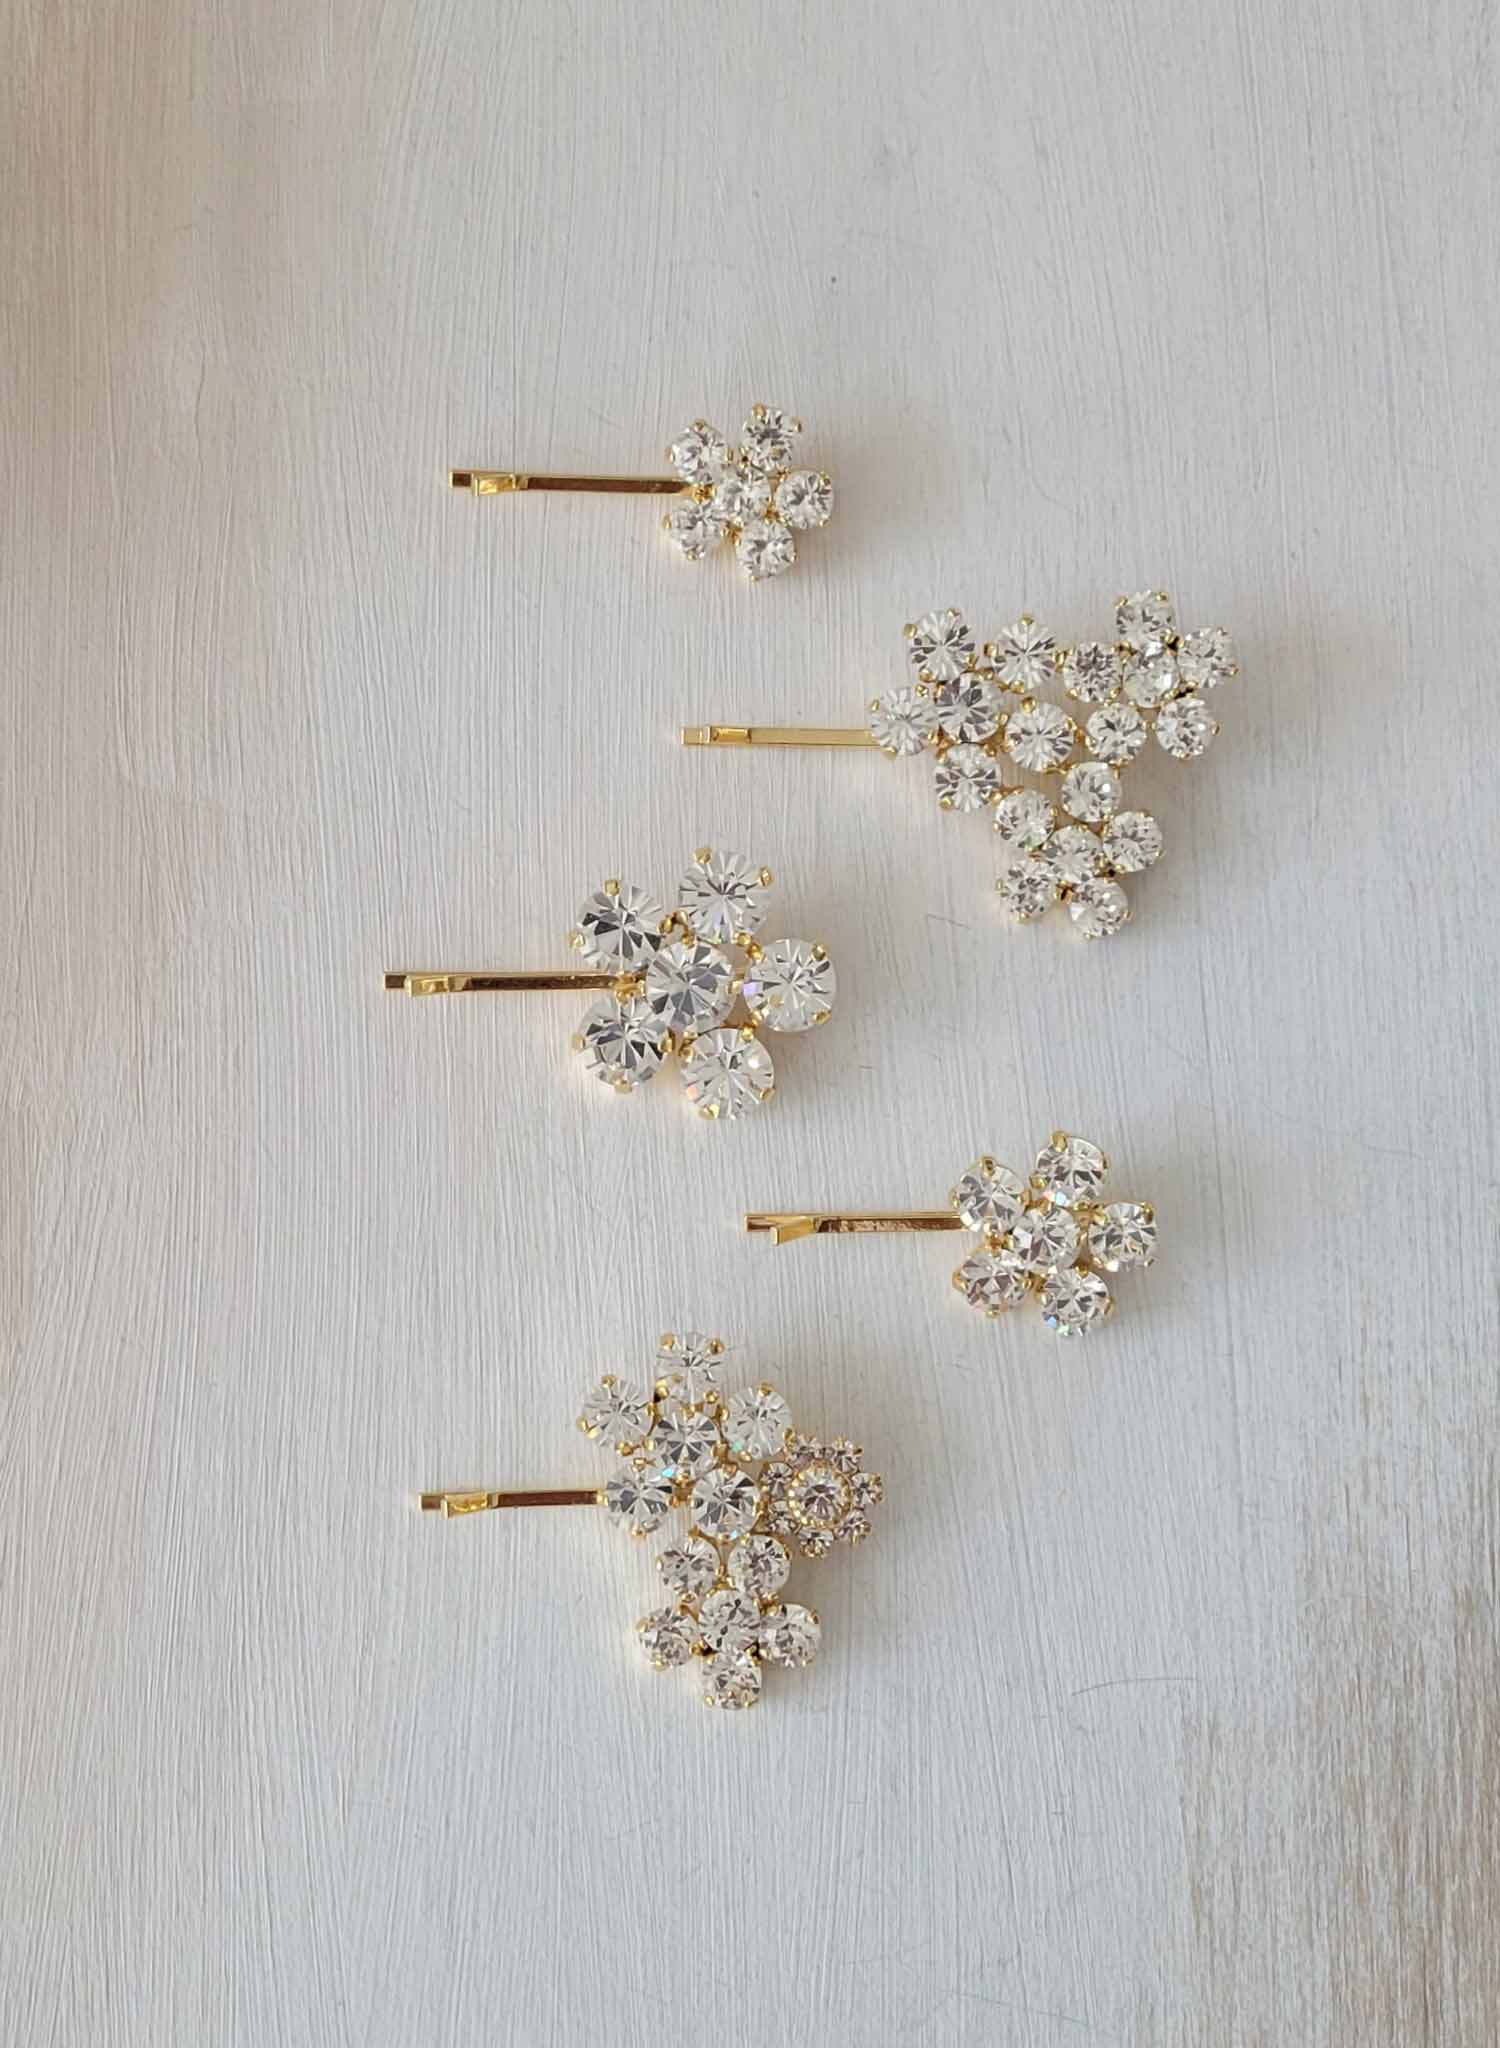 Crystal flowers and blossoms pin set of 5 - Style #2378